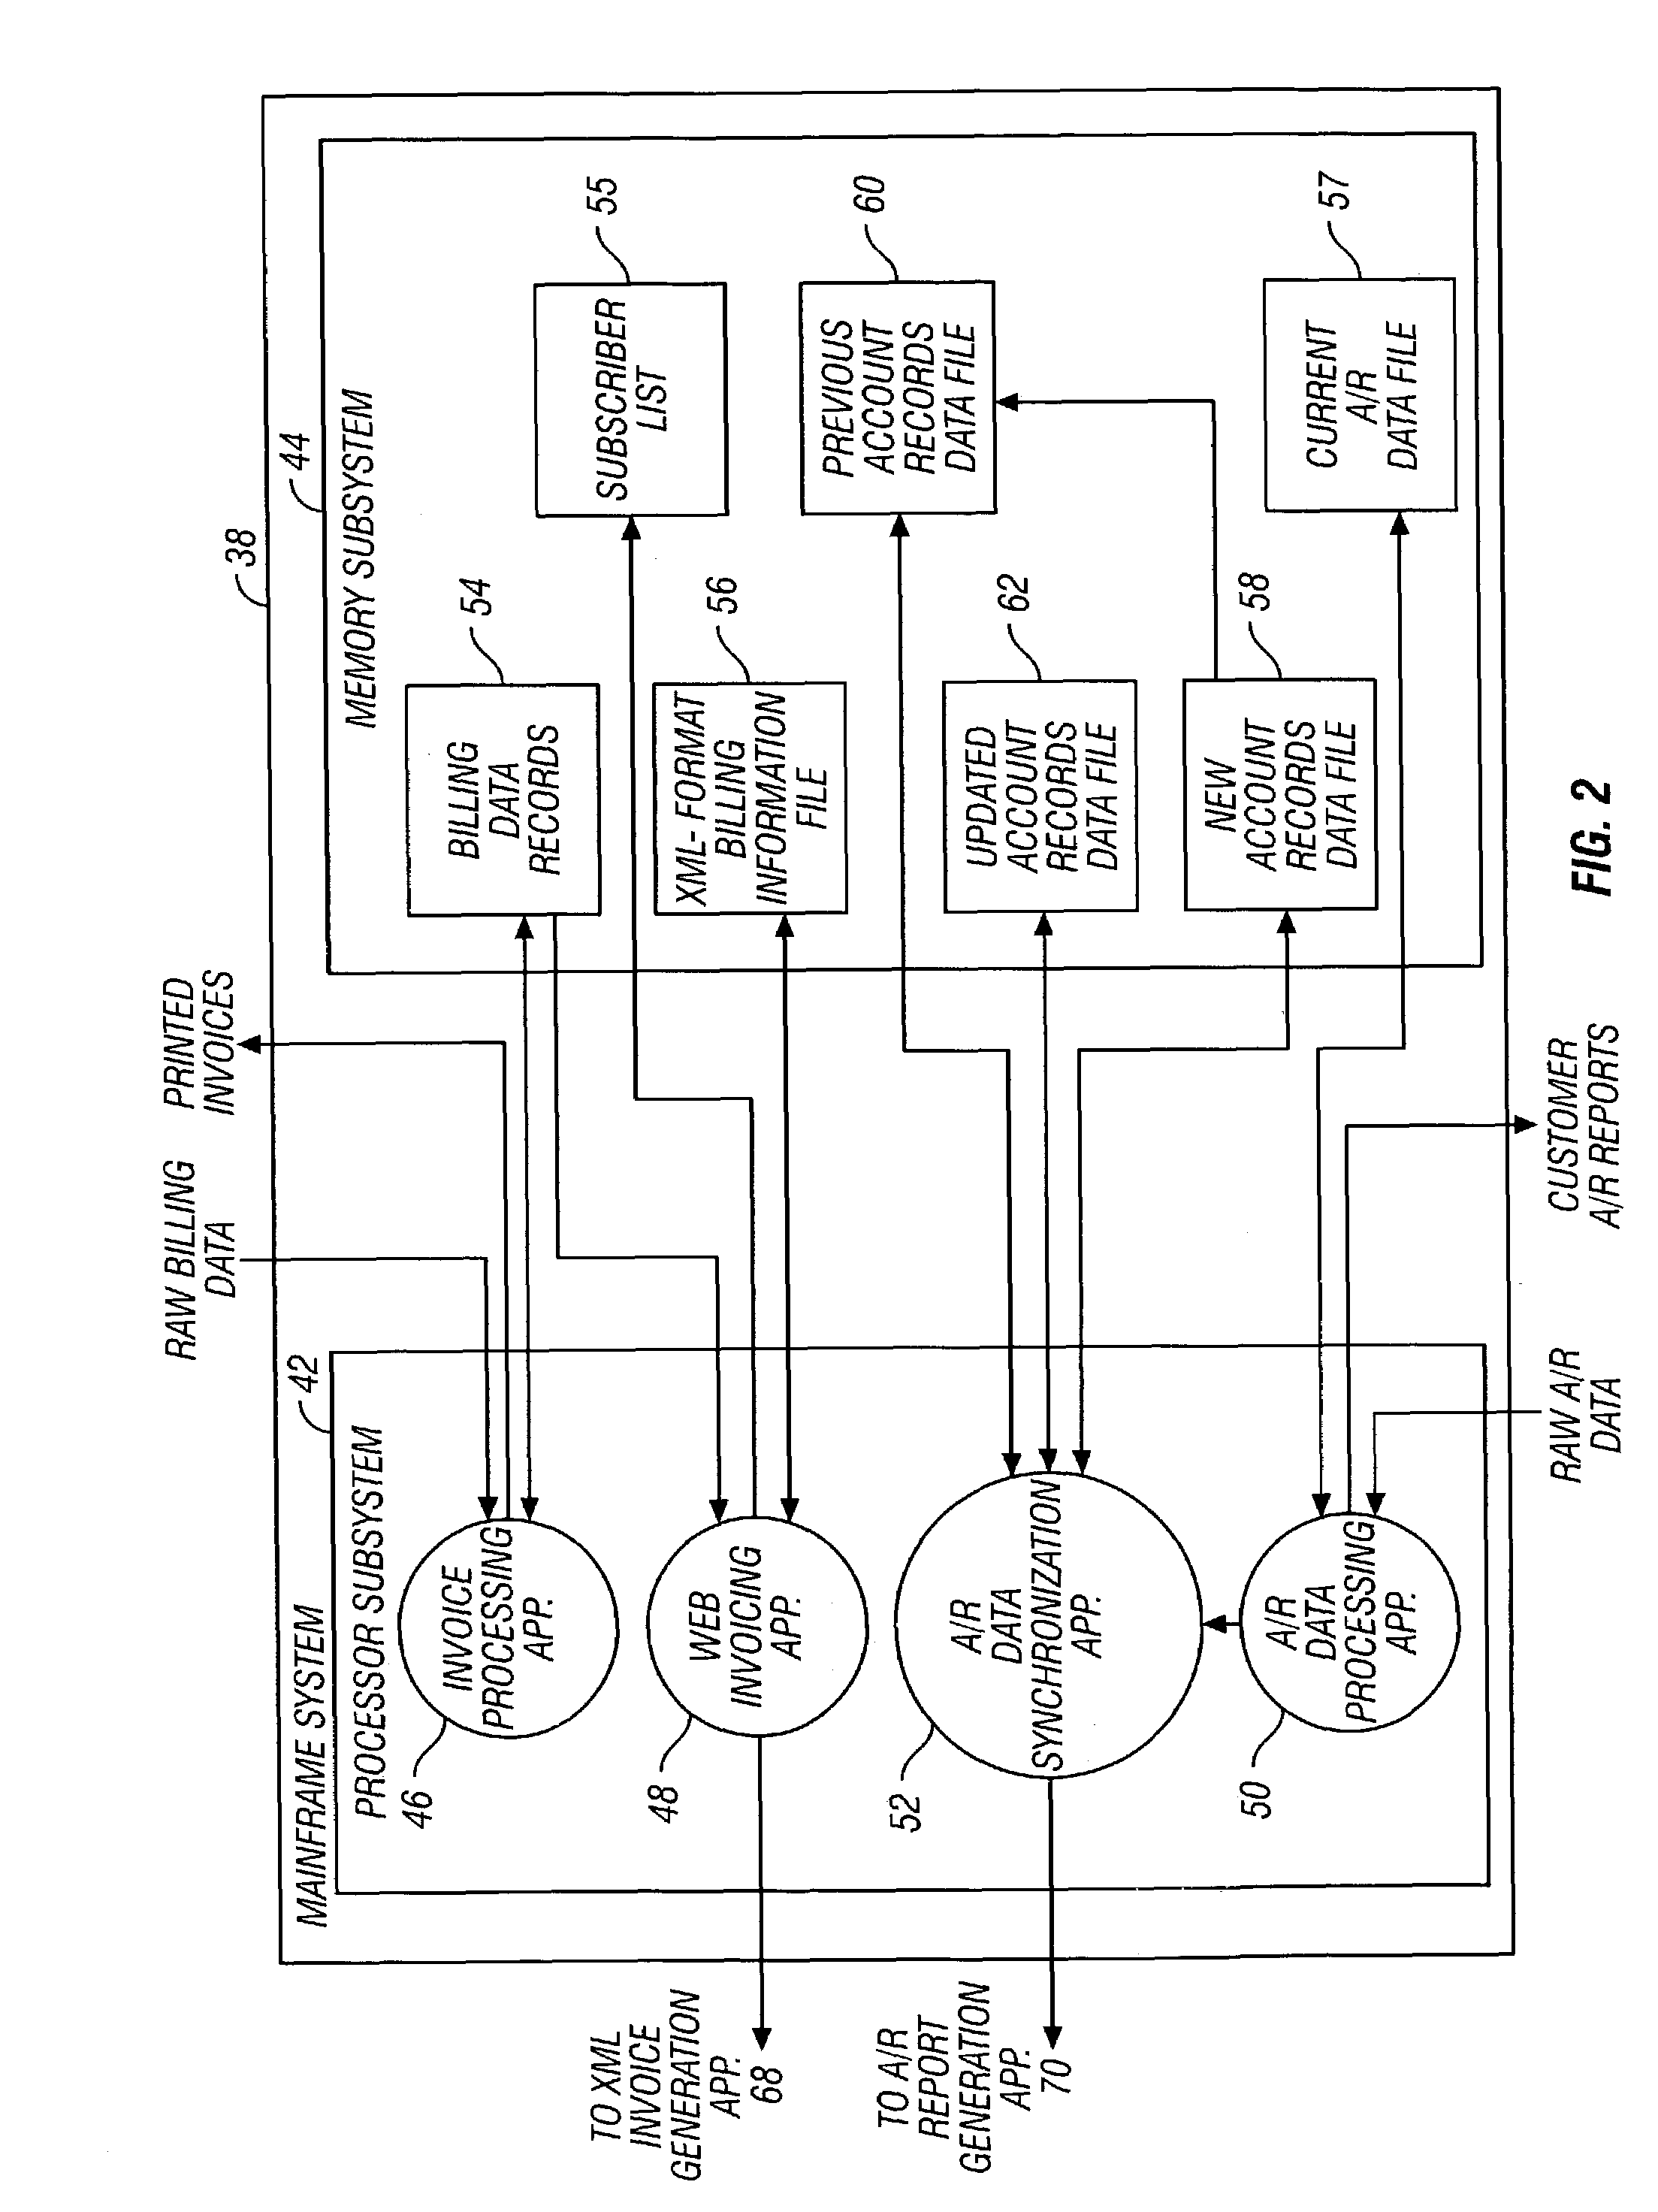 On-line account management system having a tiered account information storage system